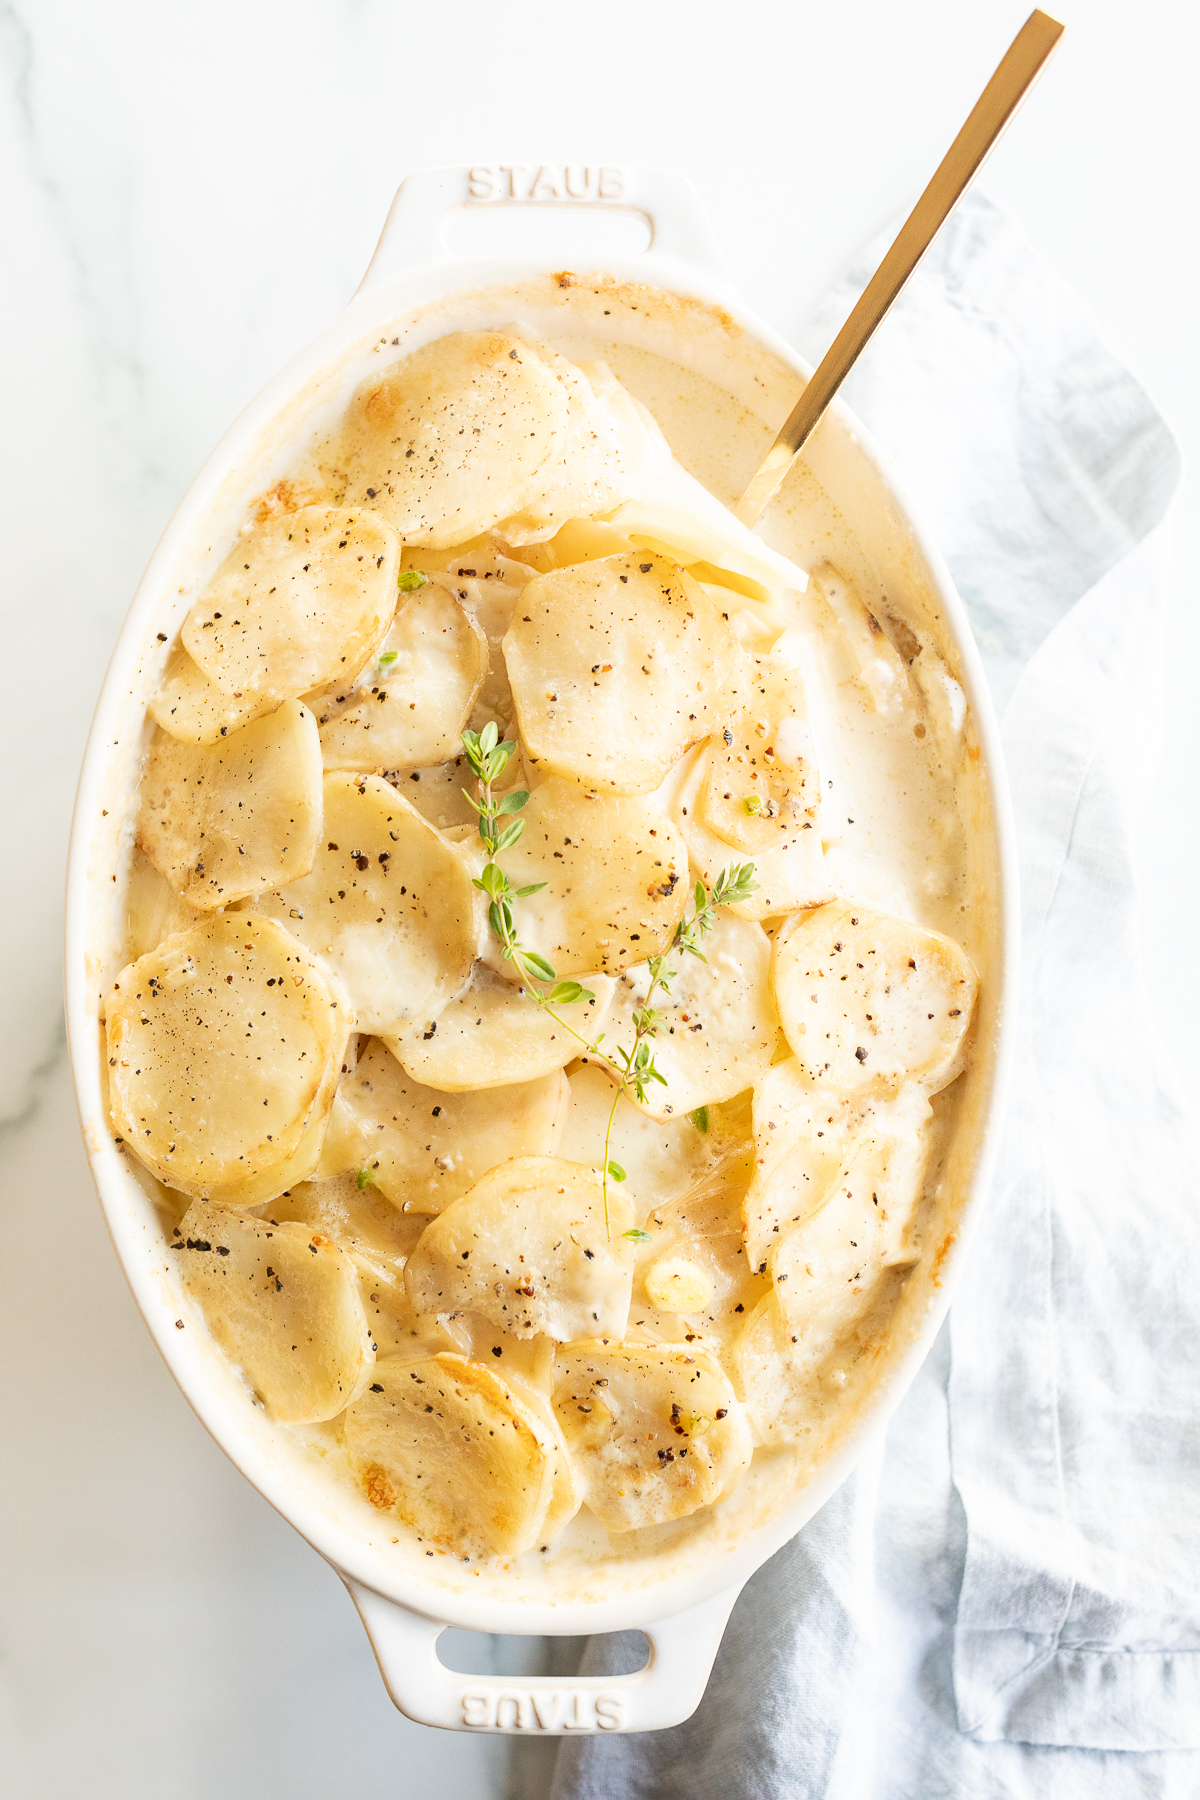 A flavorful potato side dish featuring thyme-dusted spuds served in a white dish.